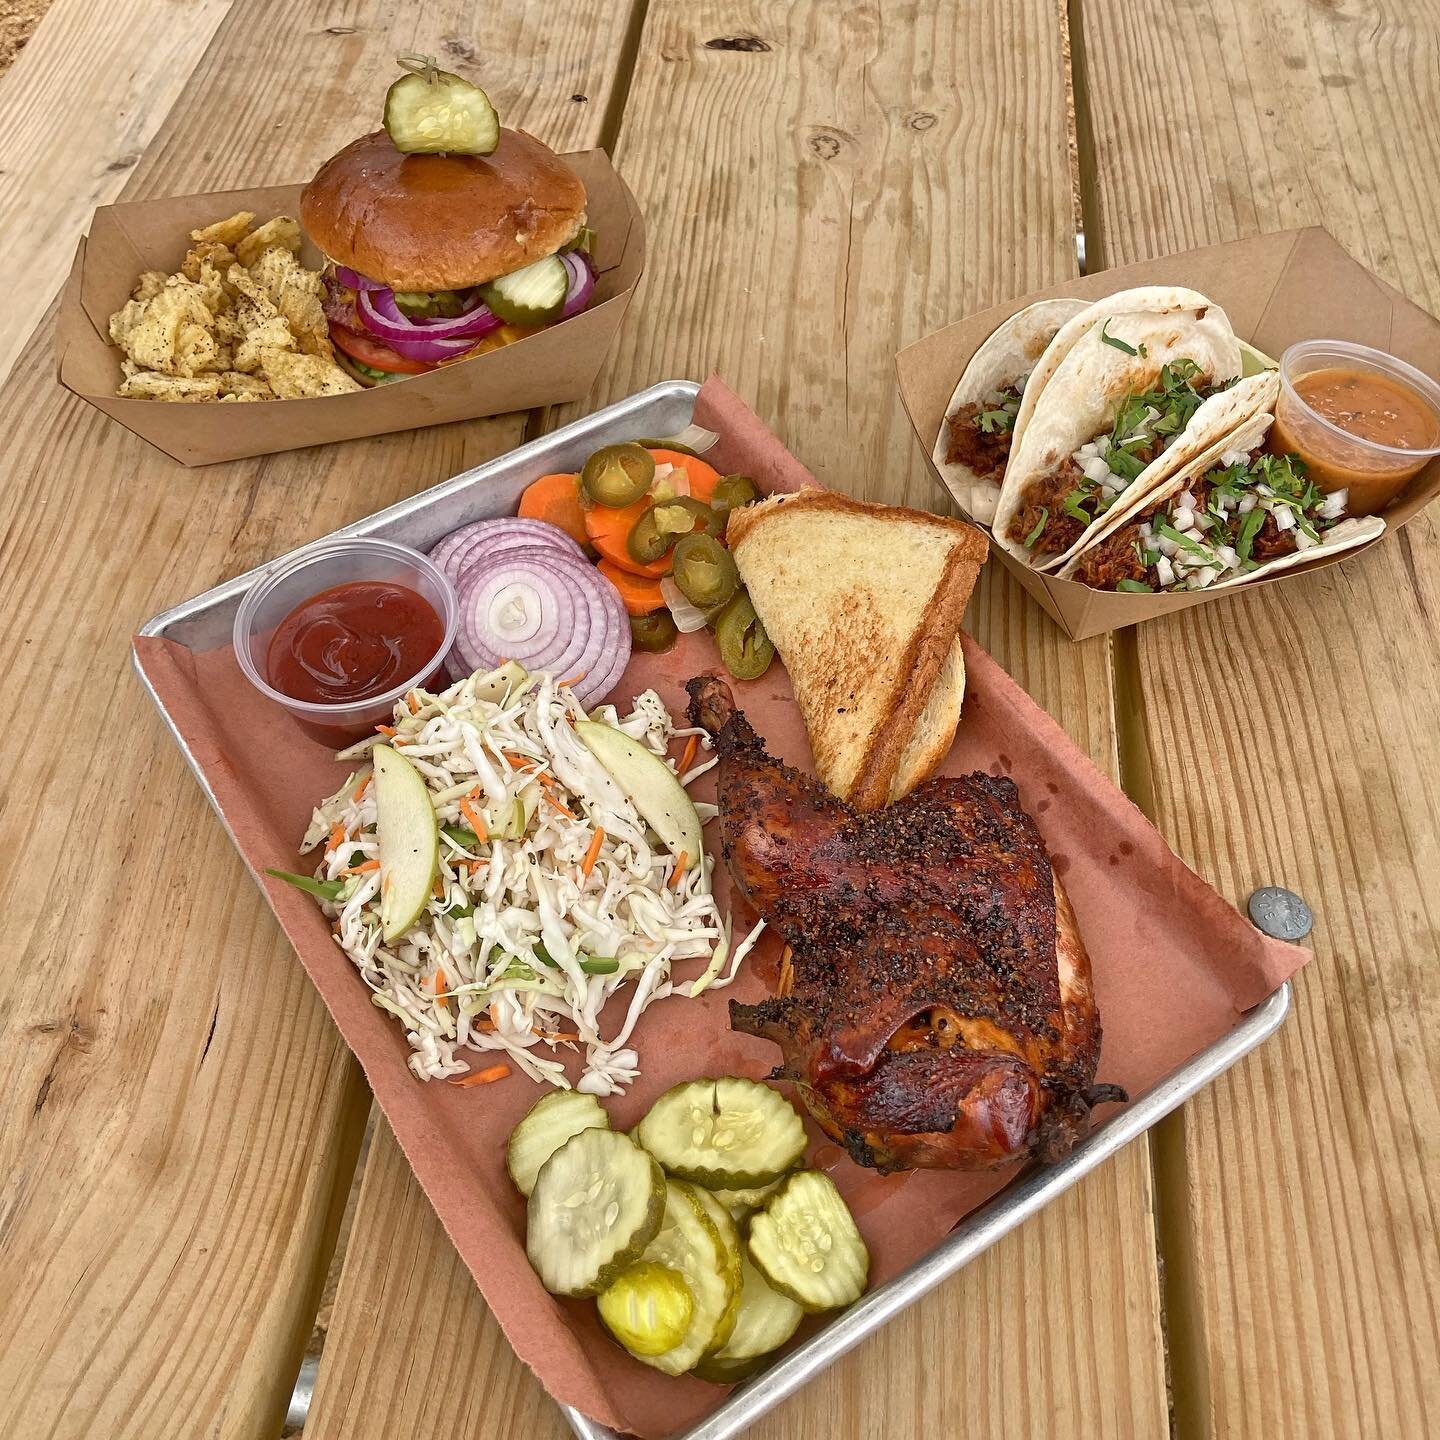 Get em&rsquo; While You Can!
&bull; Smoked Half-Chicken
&bull; Brisket Tacos
&bull; Smoked Cheeseburger

While supplies last 😋

#GetchaSome #TexasBBQ